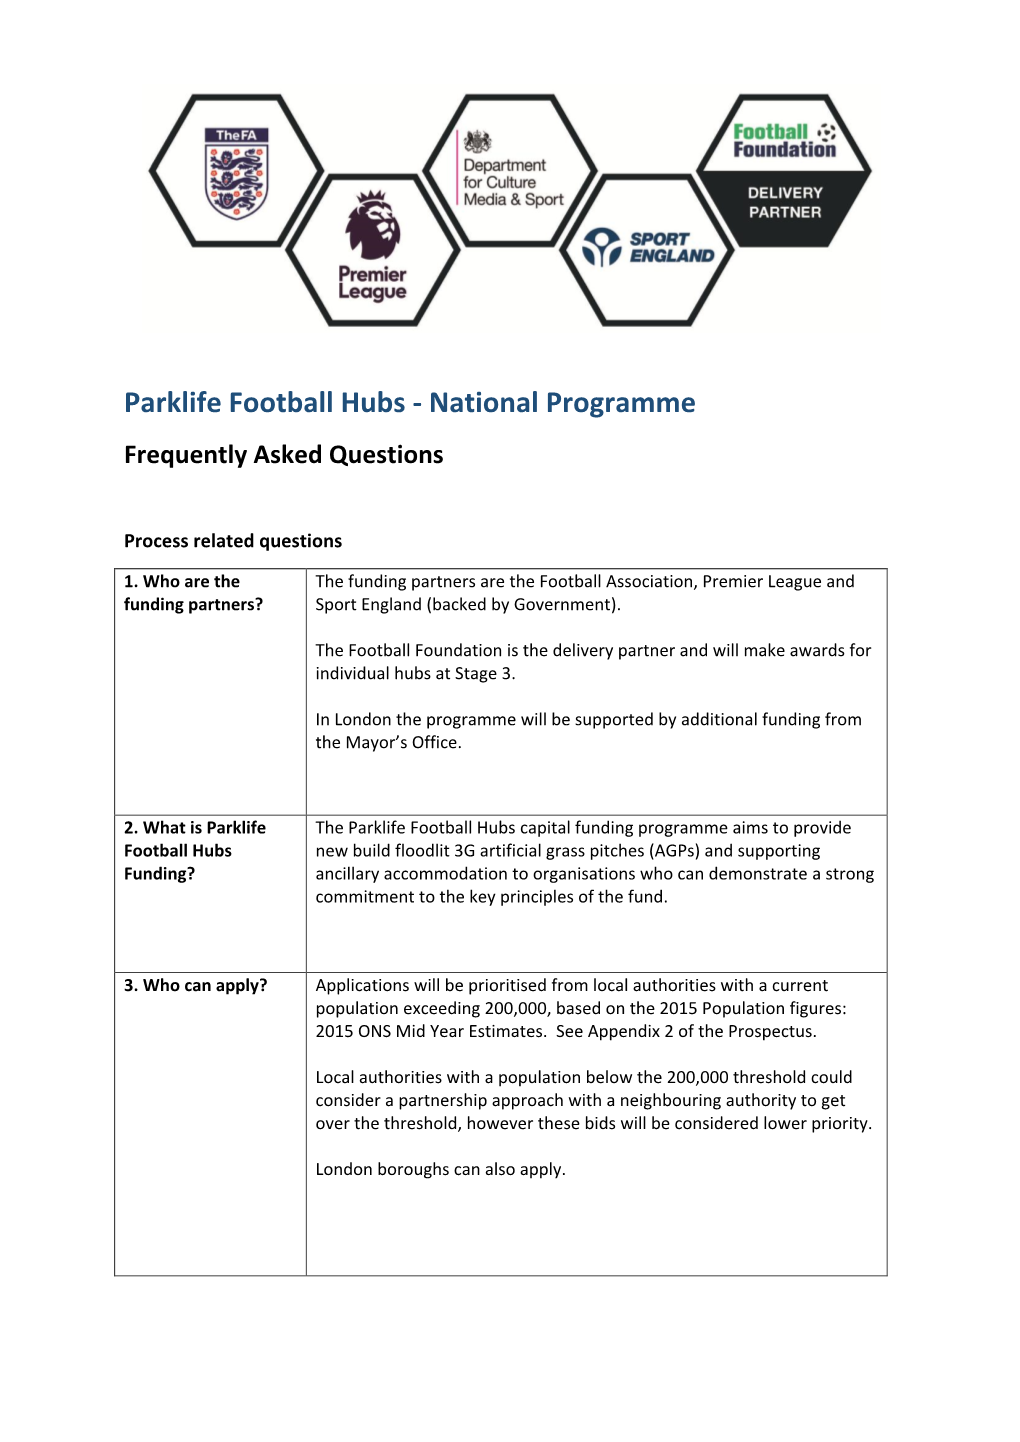 Parklife Football Hubs - National Programme Frequently Asked Questions